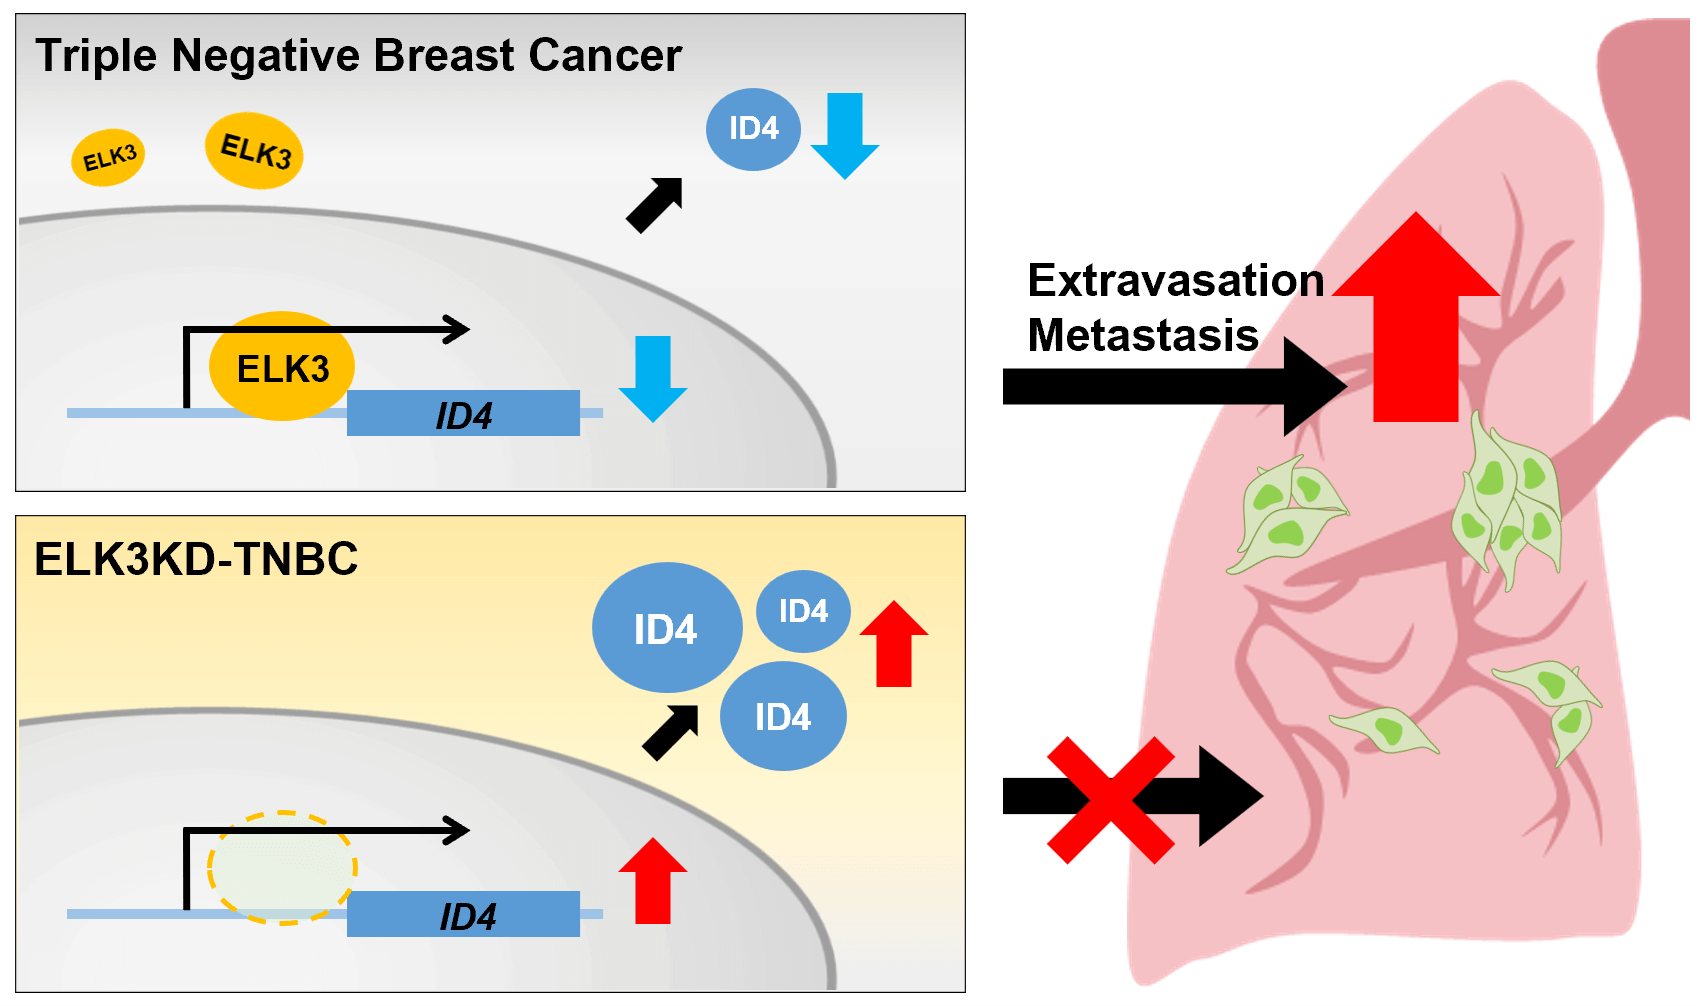 ELK3-ID4 axis governs the metastatic features of triple negative breast cancer